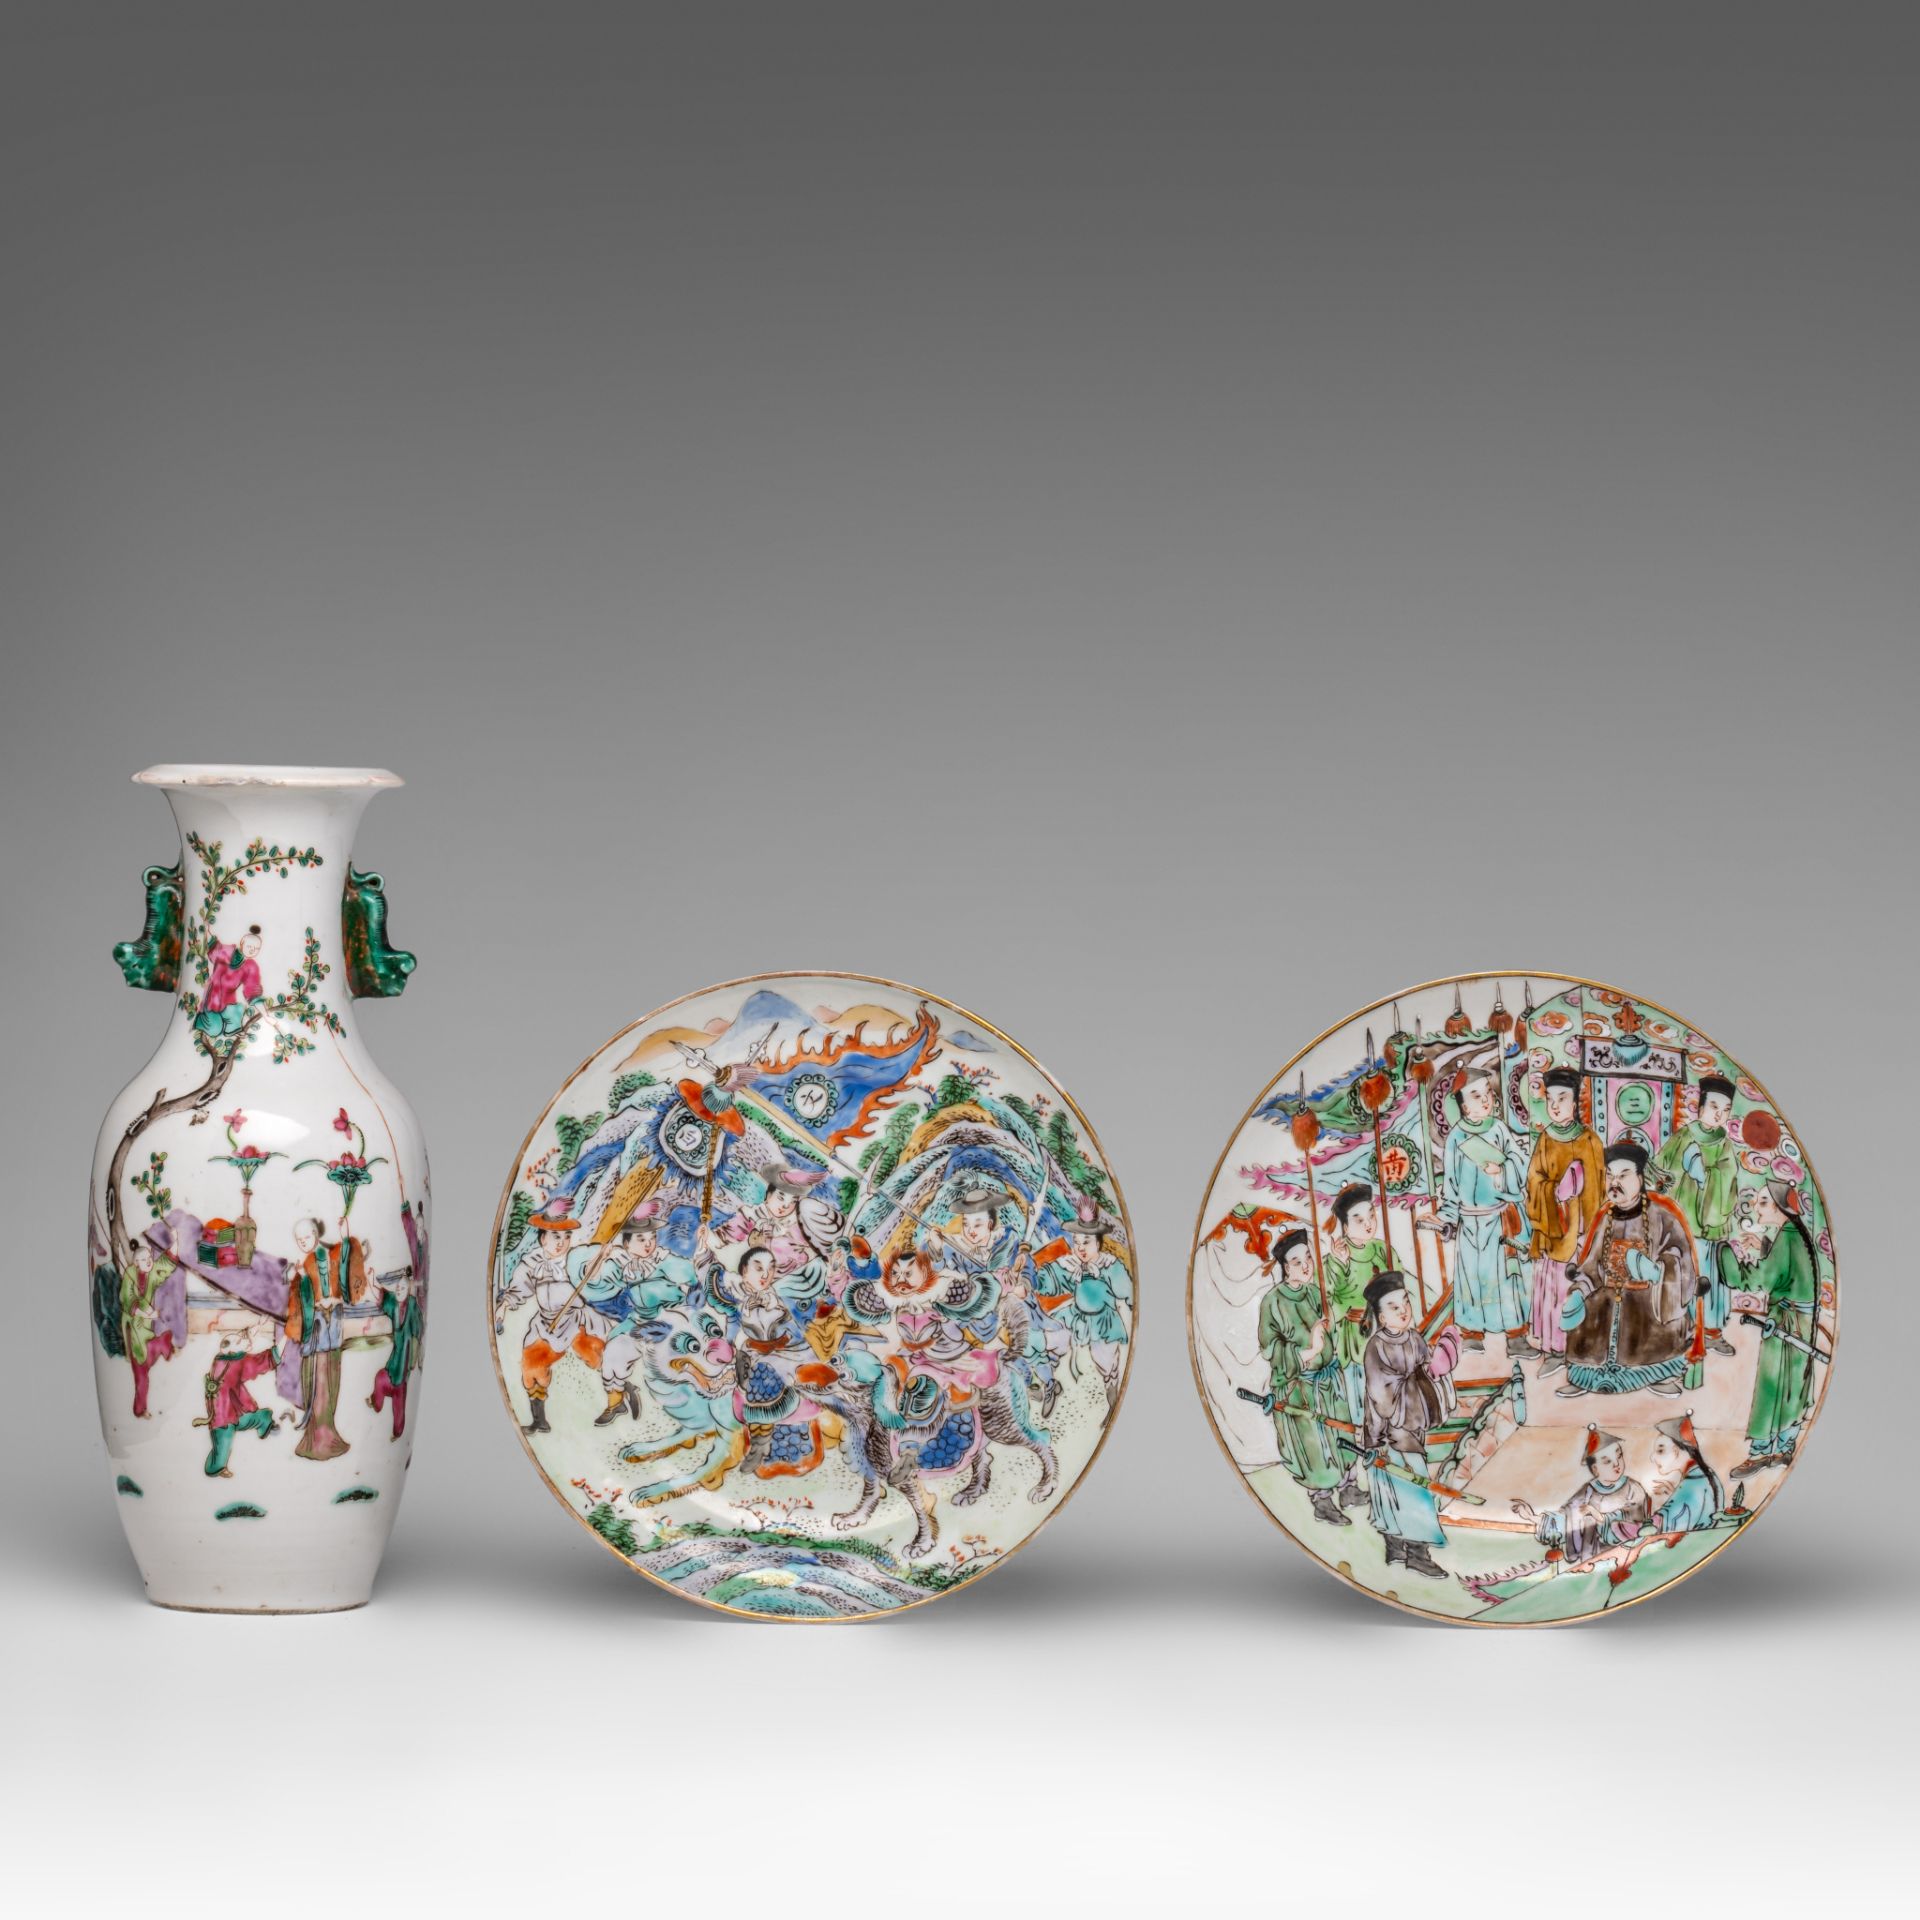 Two rare Chinese famille rose 'Battle scene' Canton dishes, 19thC, dia 19,5 cm - and a famille rose